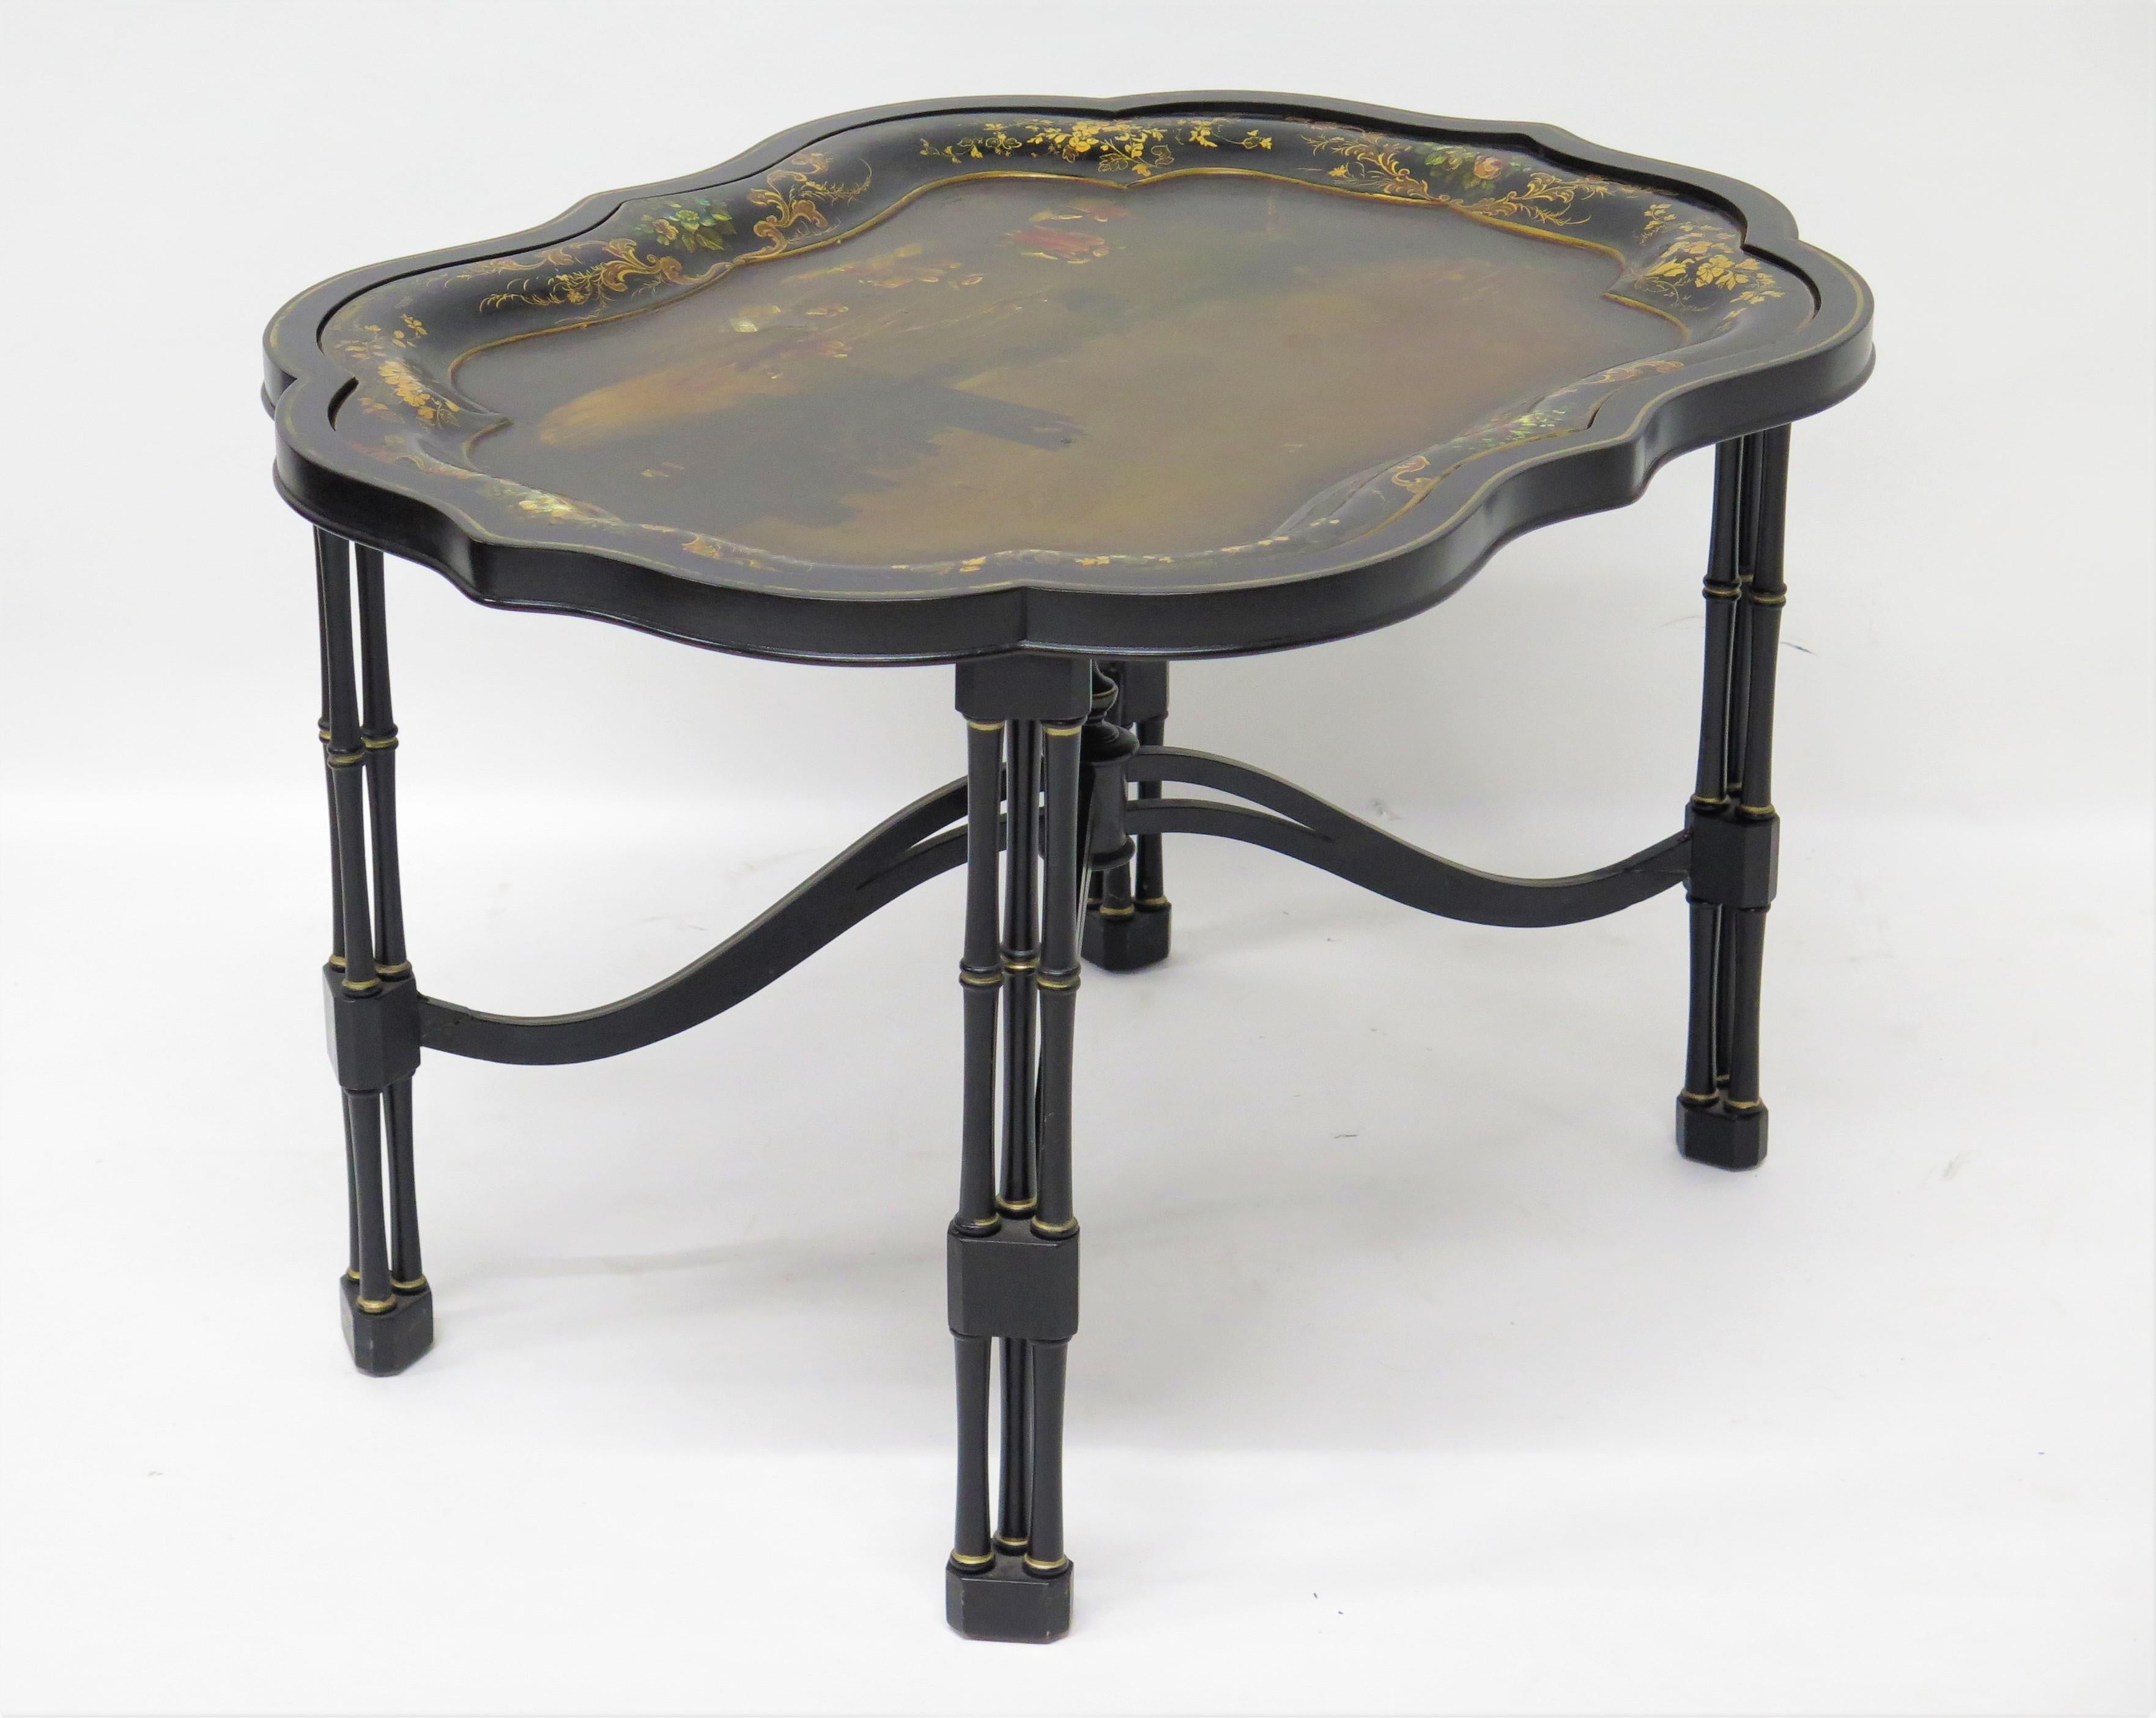 Edwardian English Hand-Painted and Gilded Papier-mâché Tray on Custom Stand For Sale